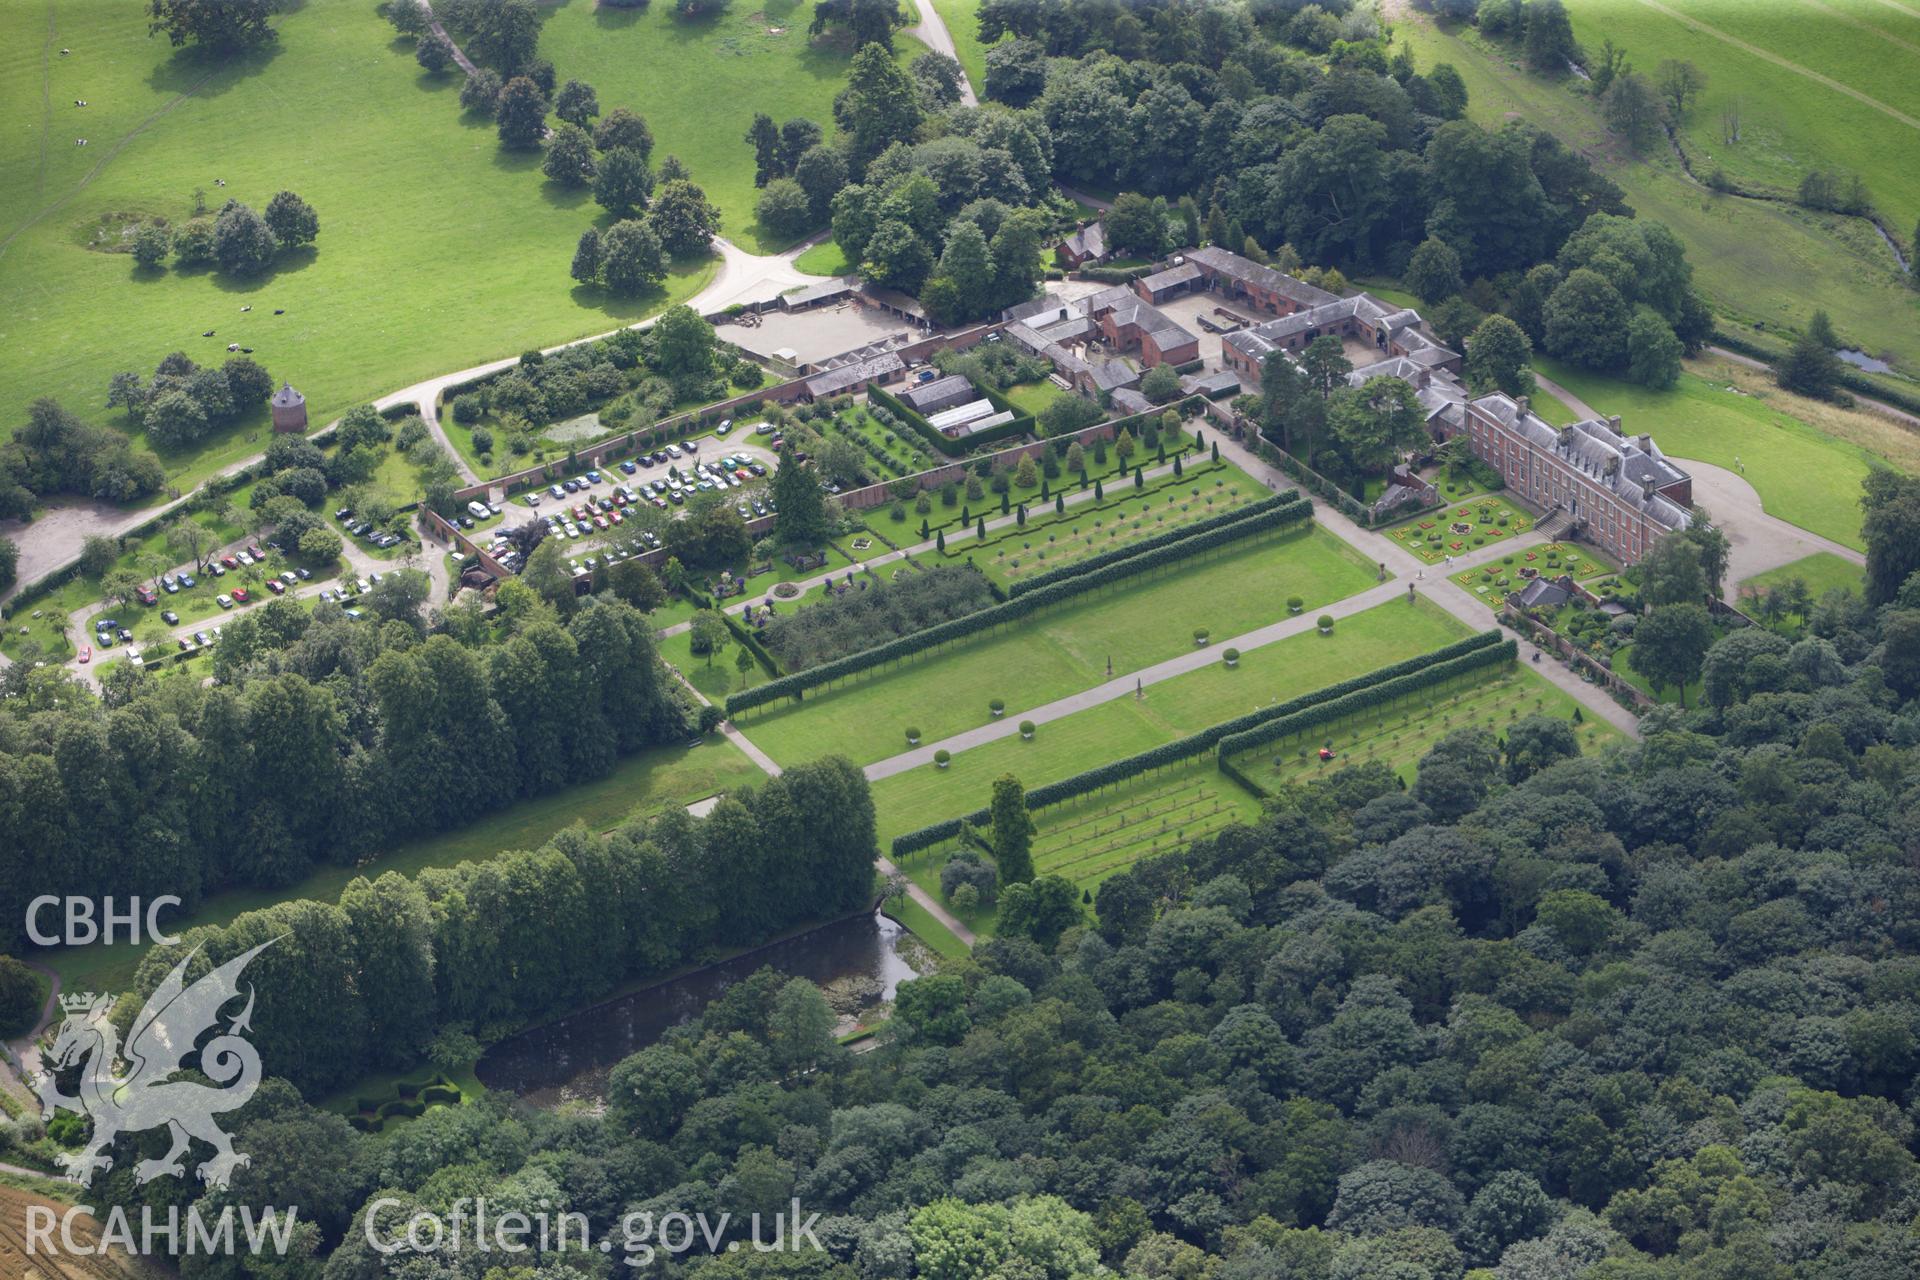 RCAHMW colour oblique aerial photograph of Erddig Hall, Marchwiel. Taken on 30 July 2009 by Toby Driver